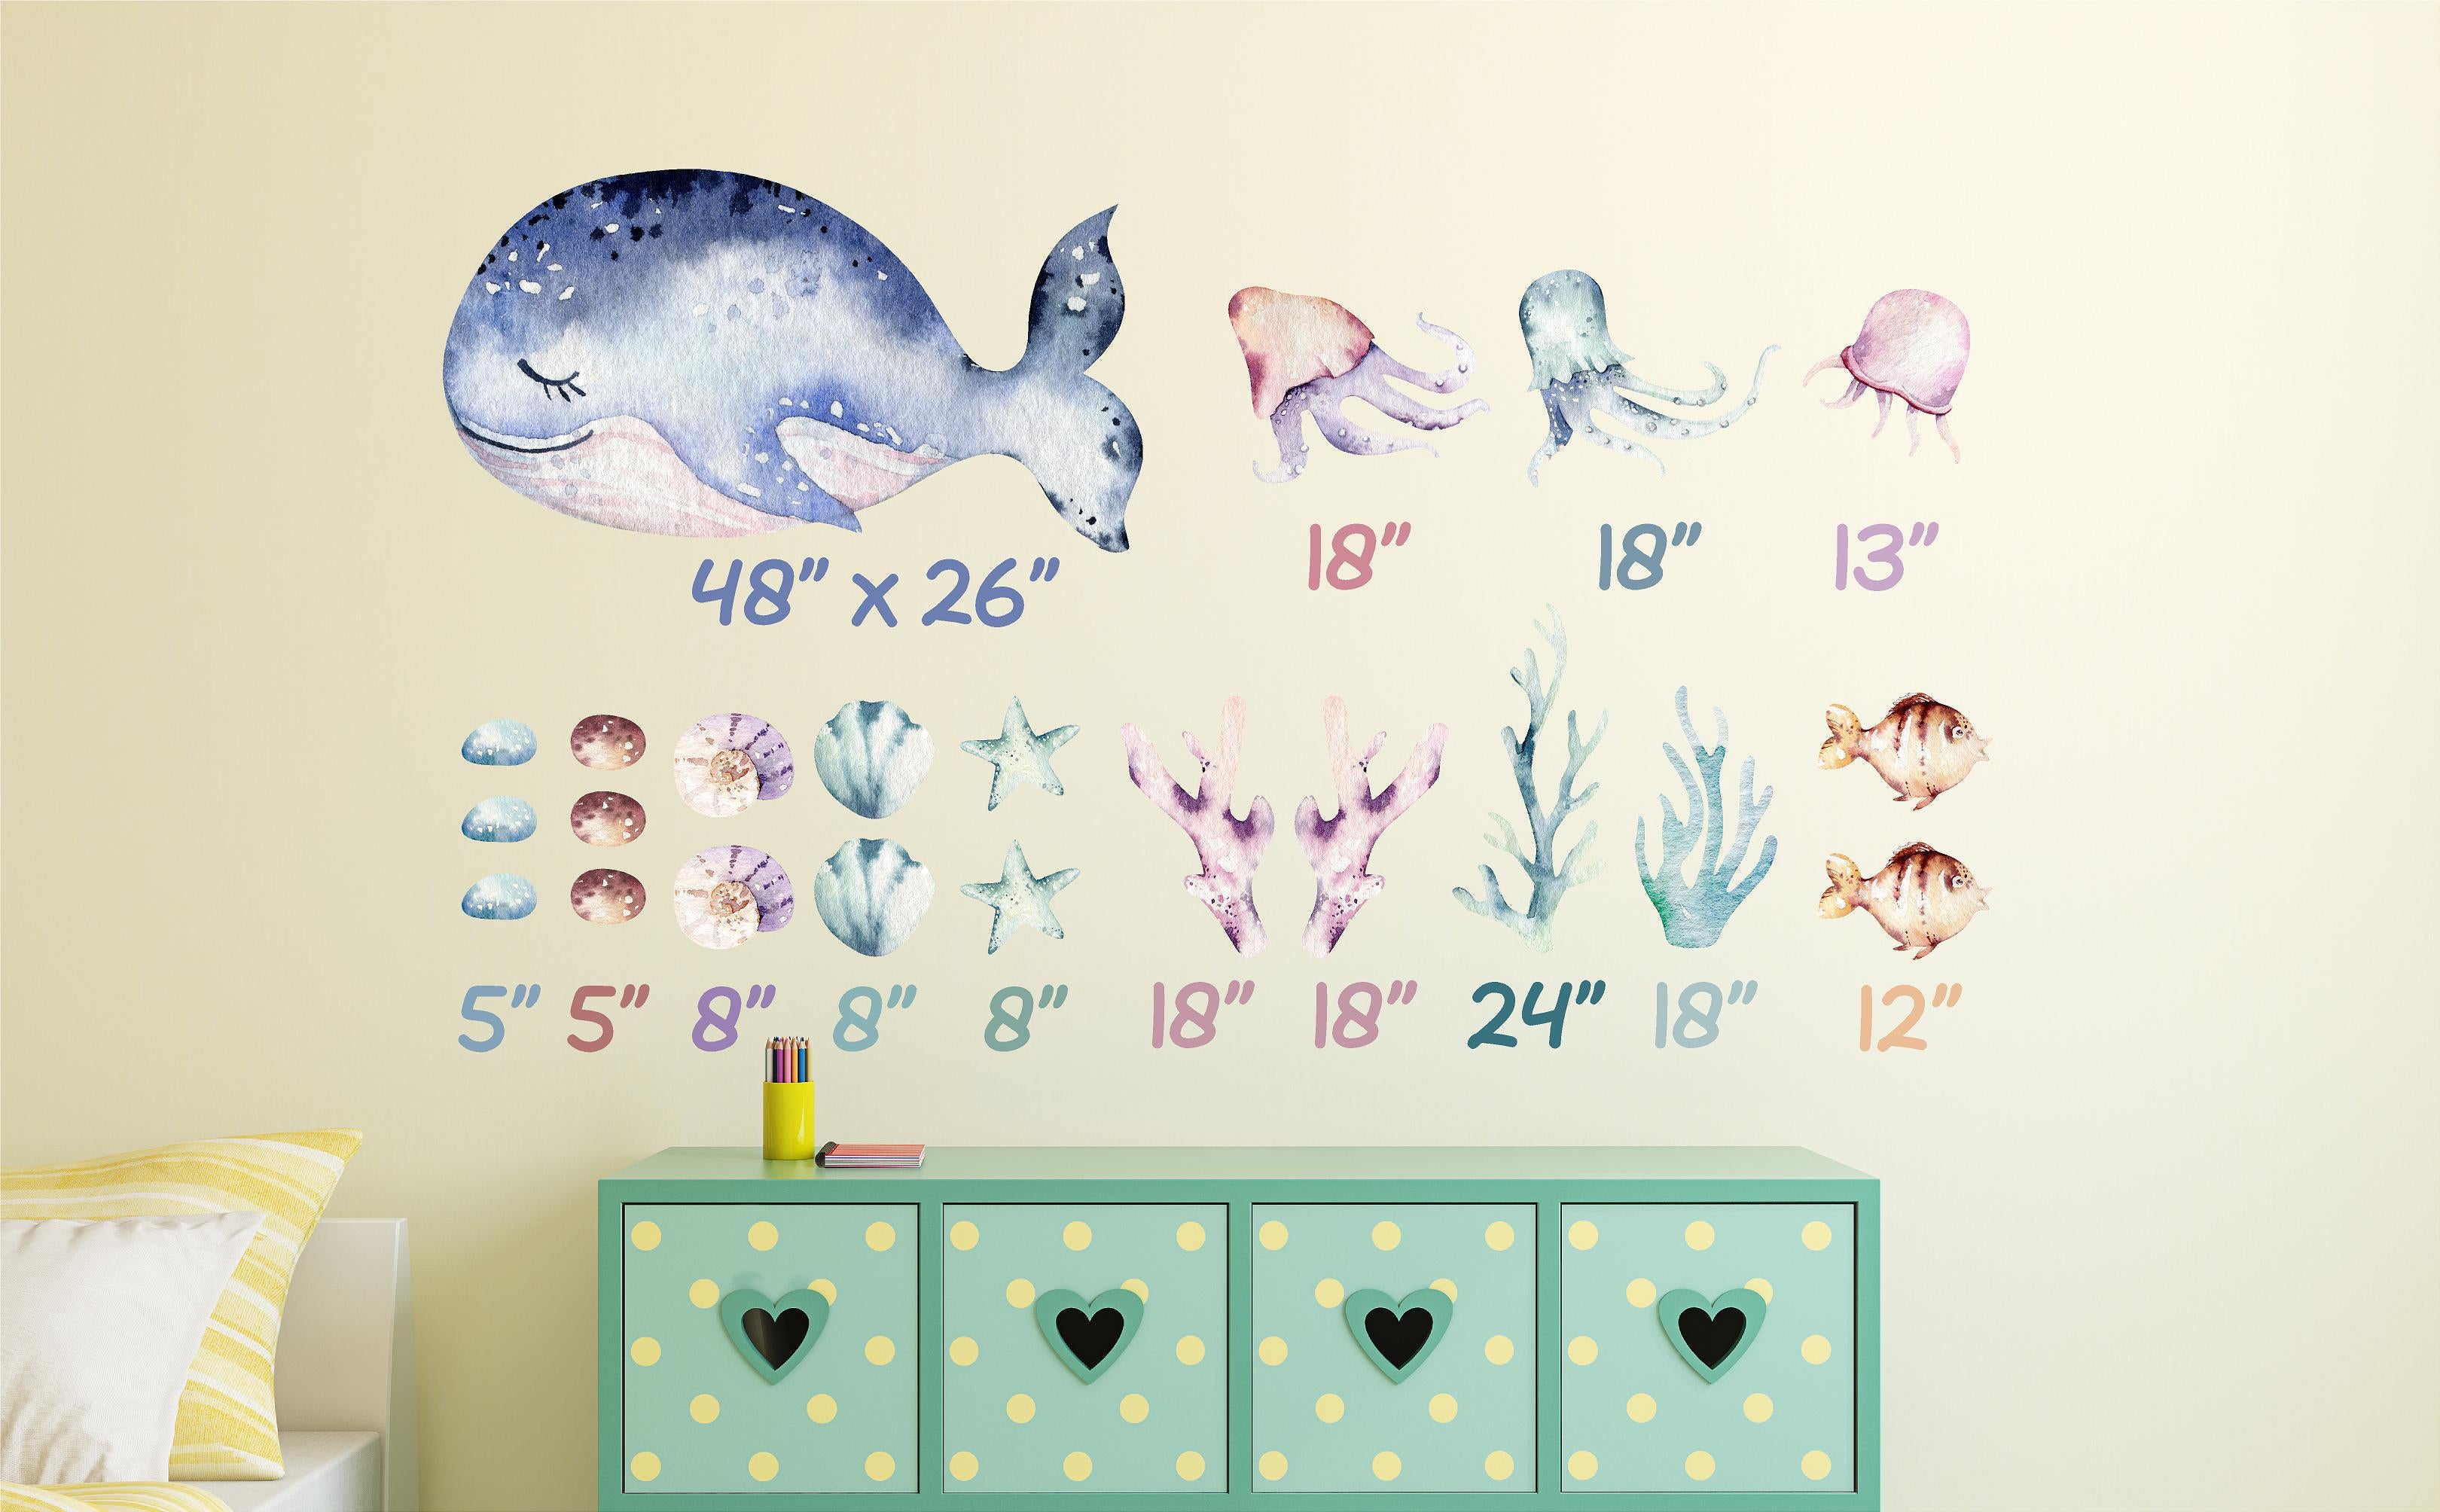 Whimsical Under The Sea Wall Decal Set #3 Ocean Sea Life Removable Fabric Wall Sticker | DecalBaby